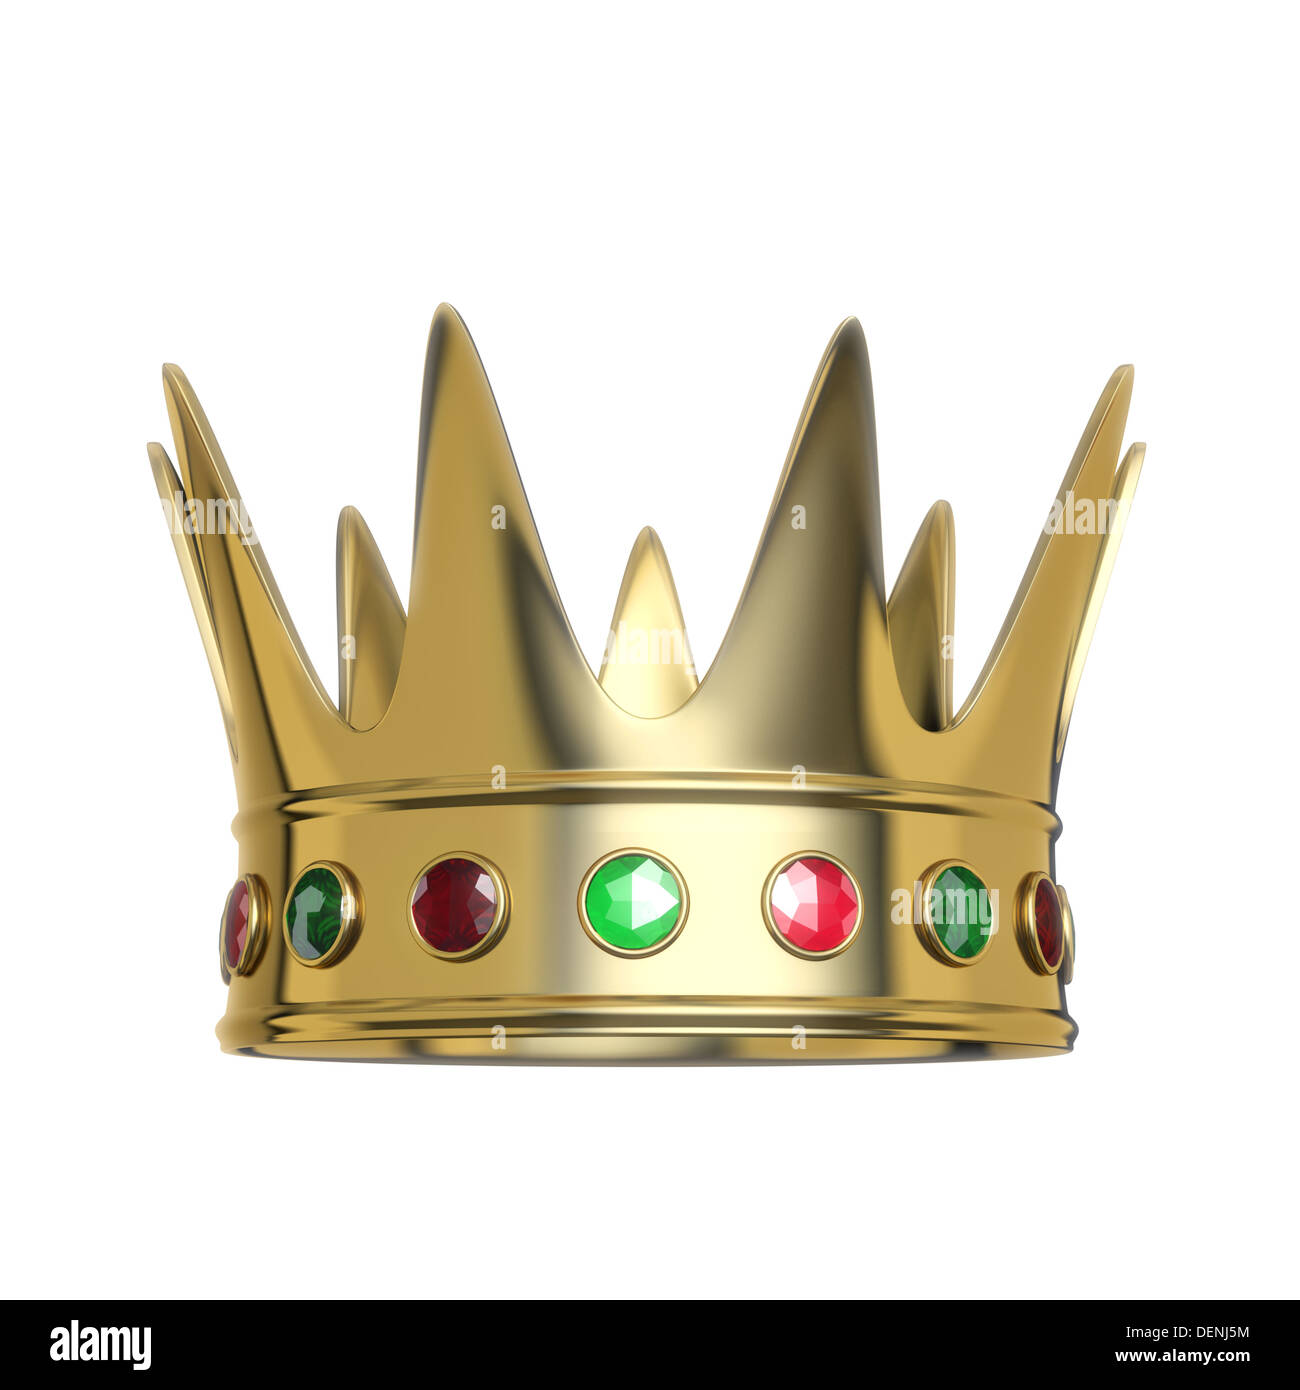 Golden crown isolated on white background Stock Photo